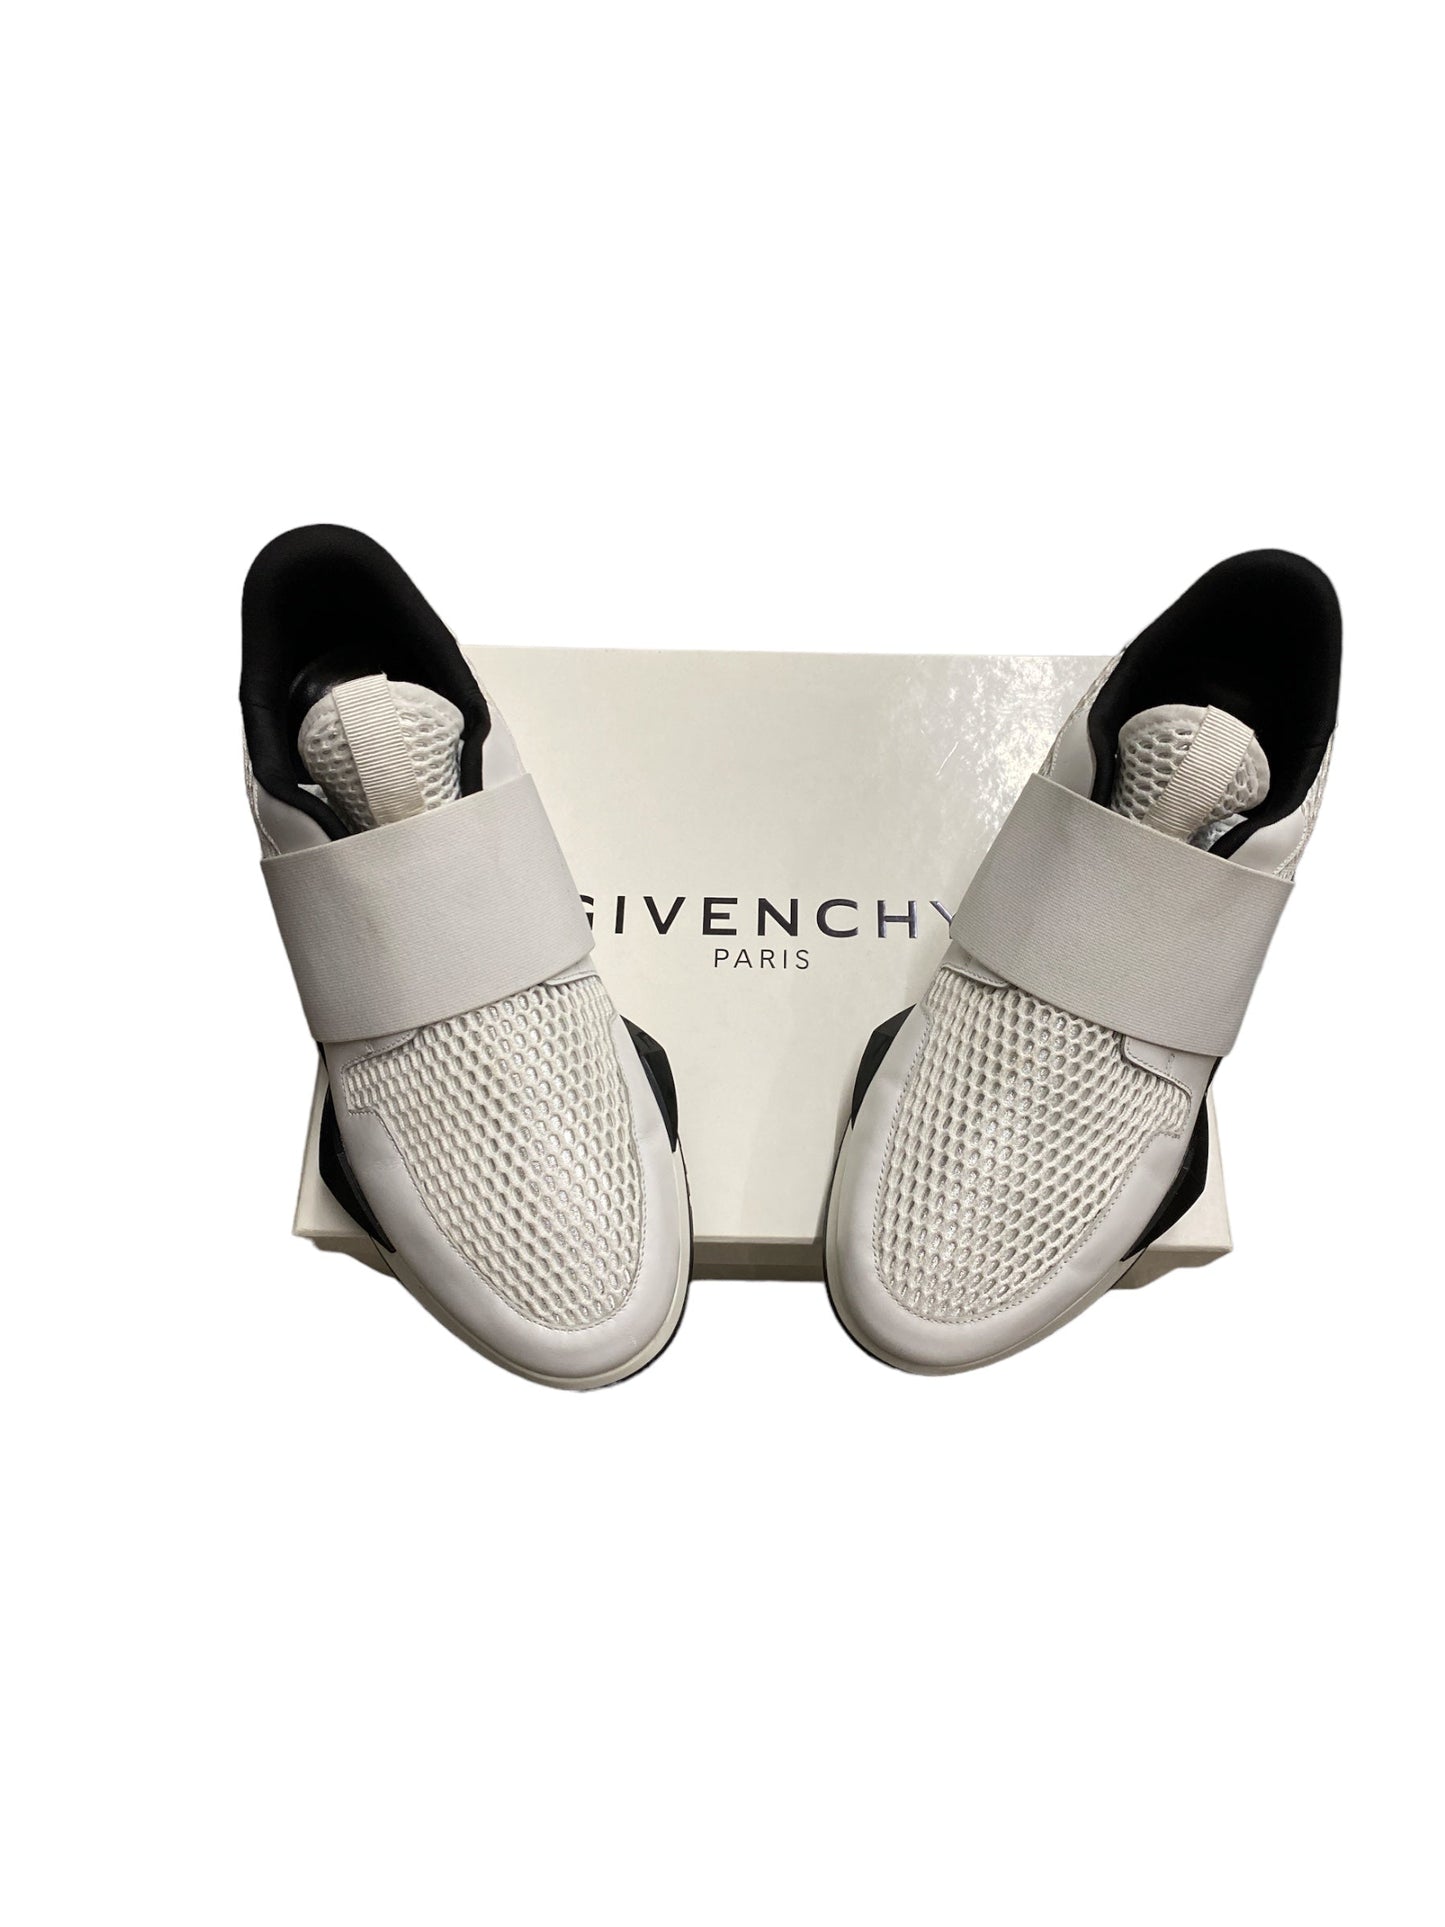 Shoes Sneakers By Givenchy Size:41